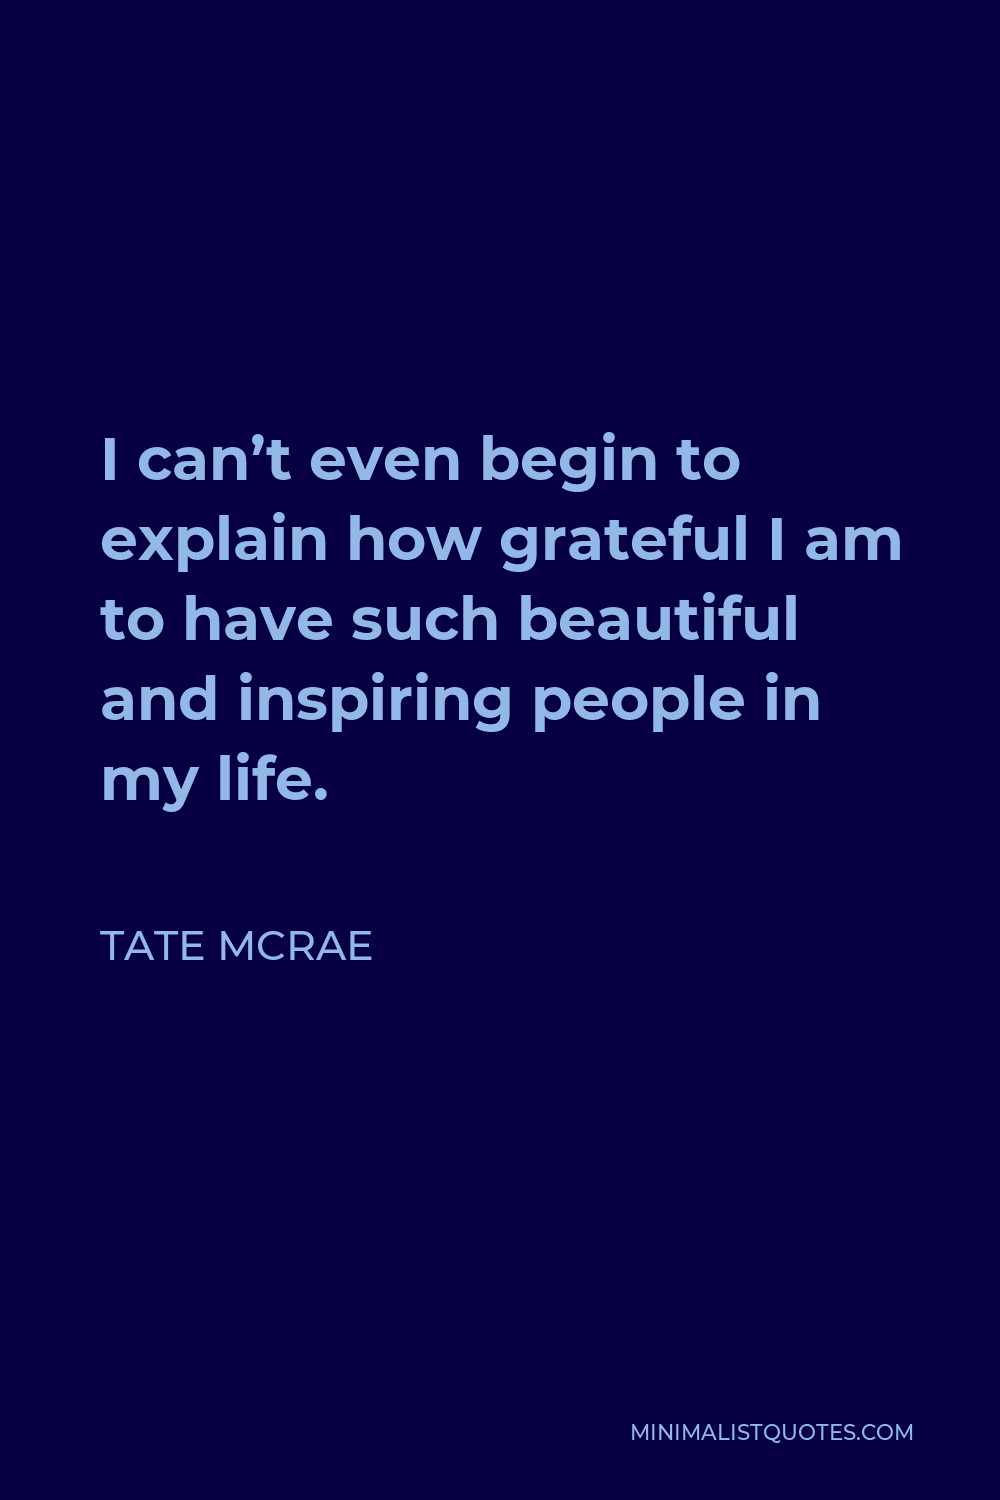 Tate McRae Quote - I can’t even begin to explain how grateful I am to have such beautiful and inspiring people in my life.